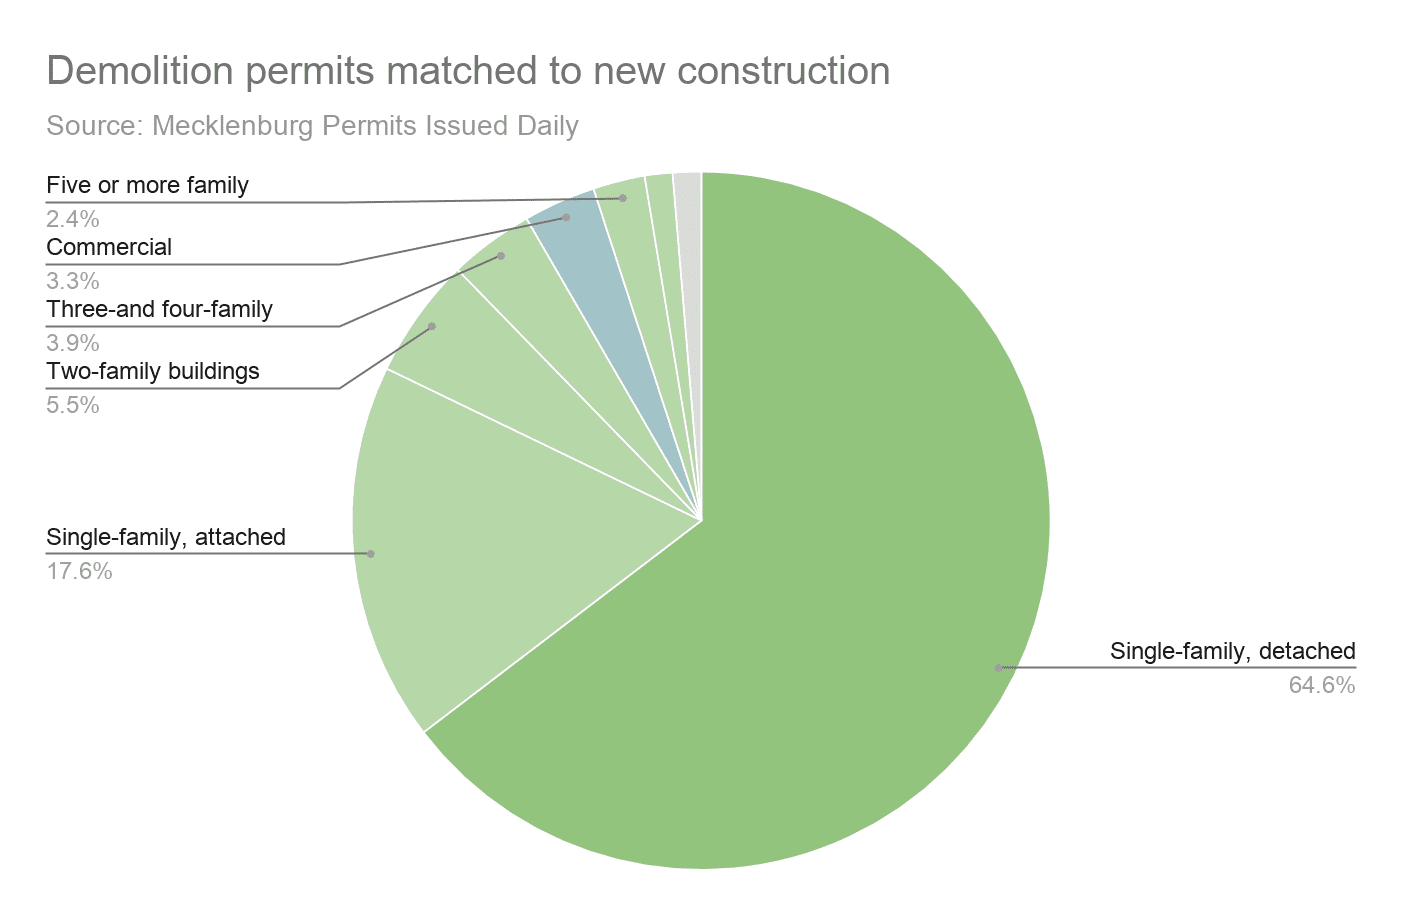 A pie chart of demolition permits matched to new construction.